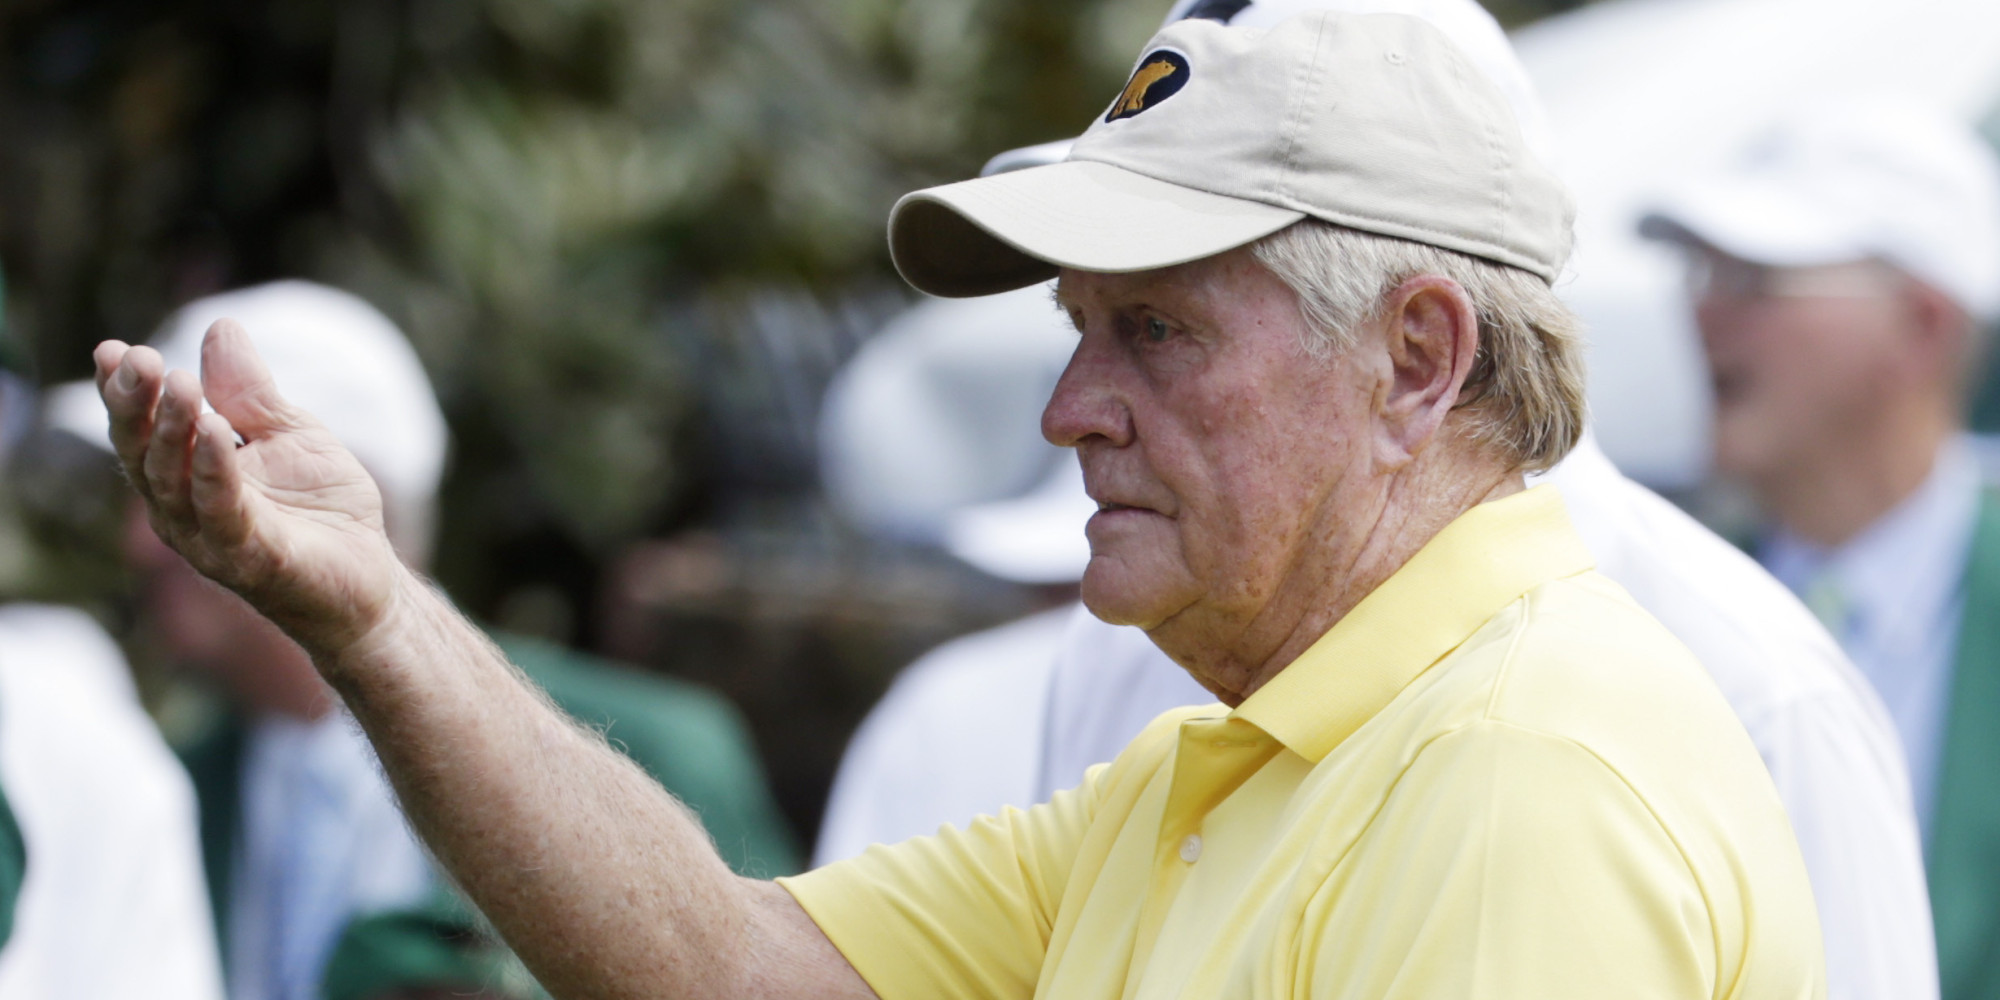 Jack Nicklaus Nails A Hole-In-One, Is Still A Boss | HuffPost